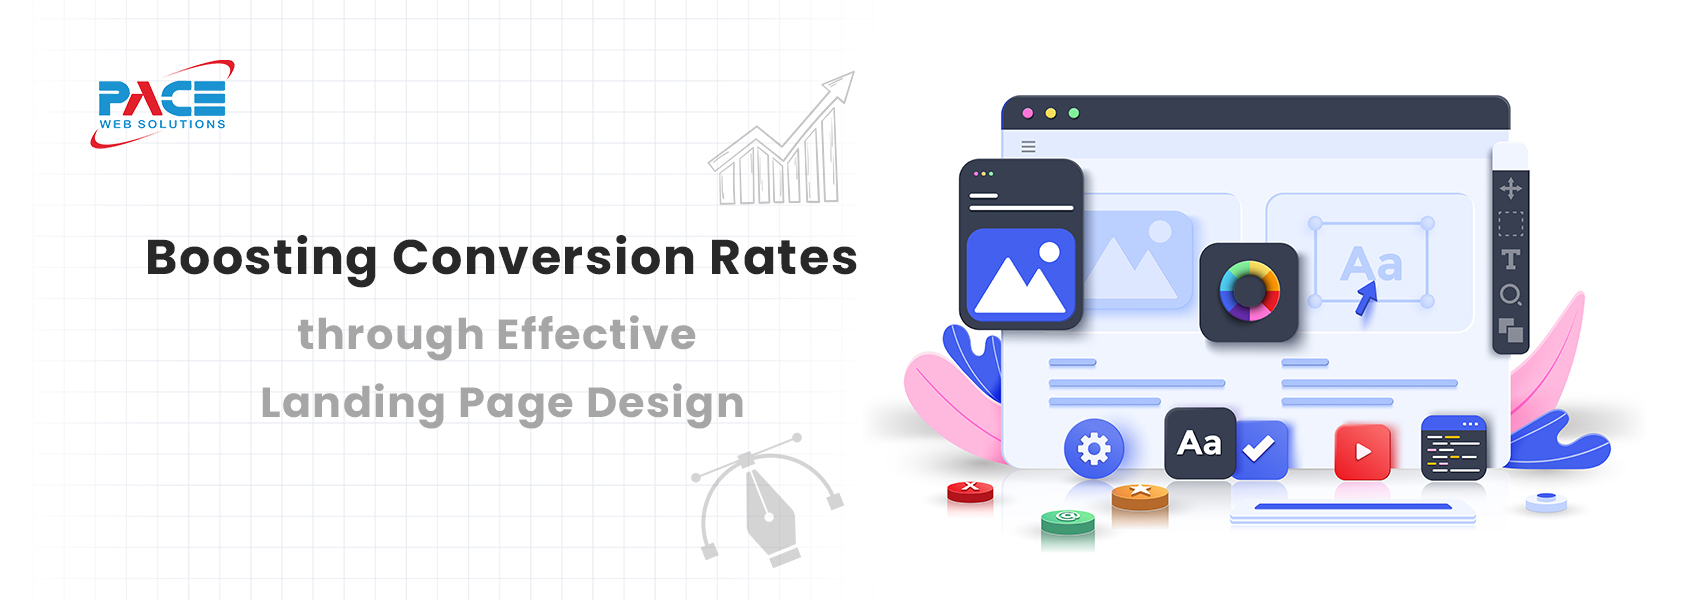 Boosting Conversion Rates through Effective Landing Page Design